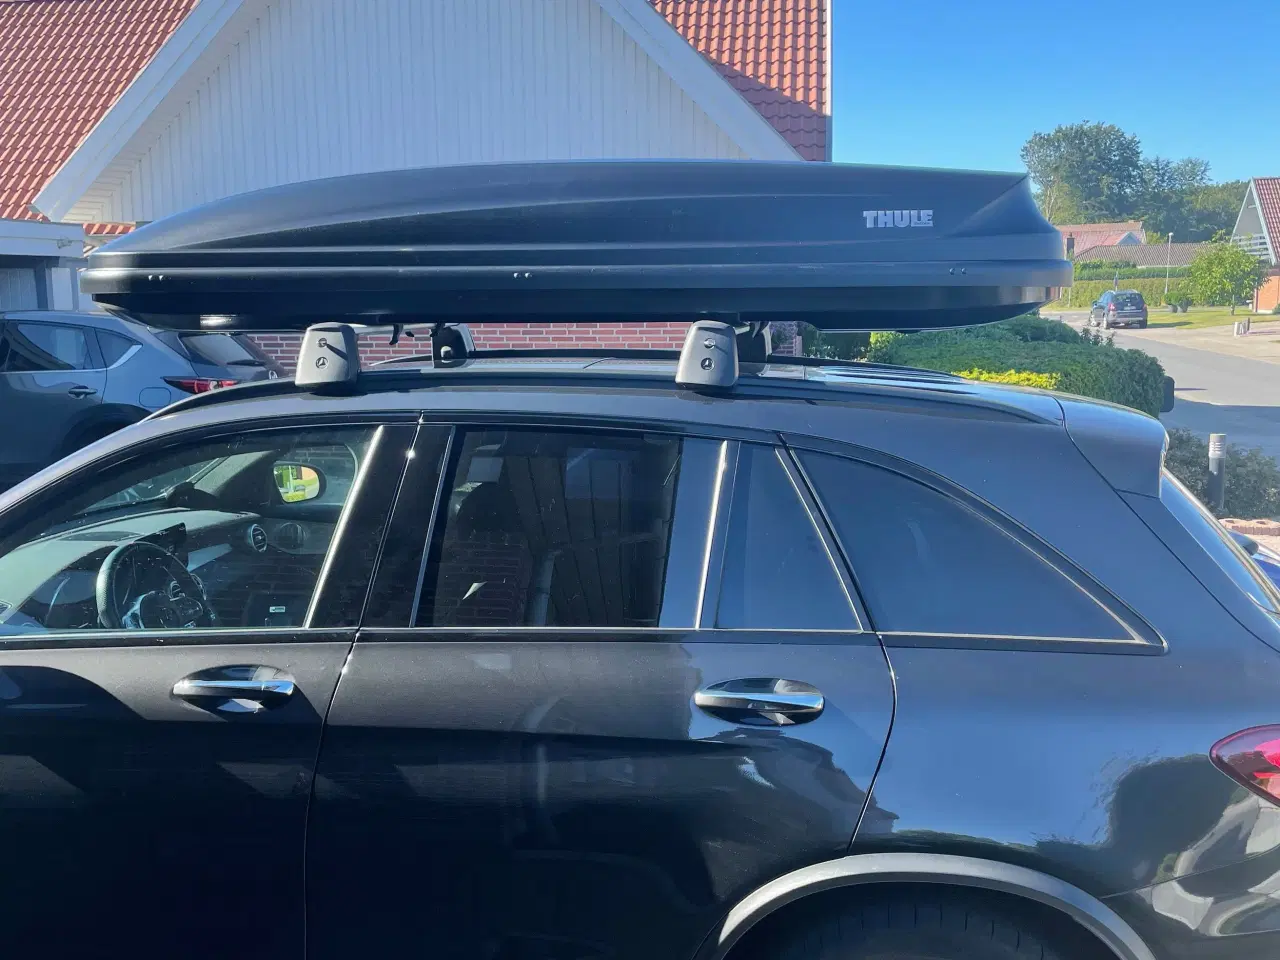 Billede 1 - THULE Pacific 700 Tagboks UDLEJES